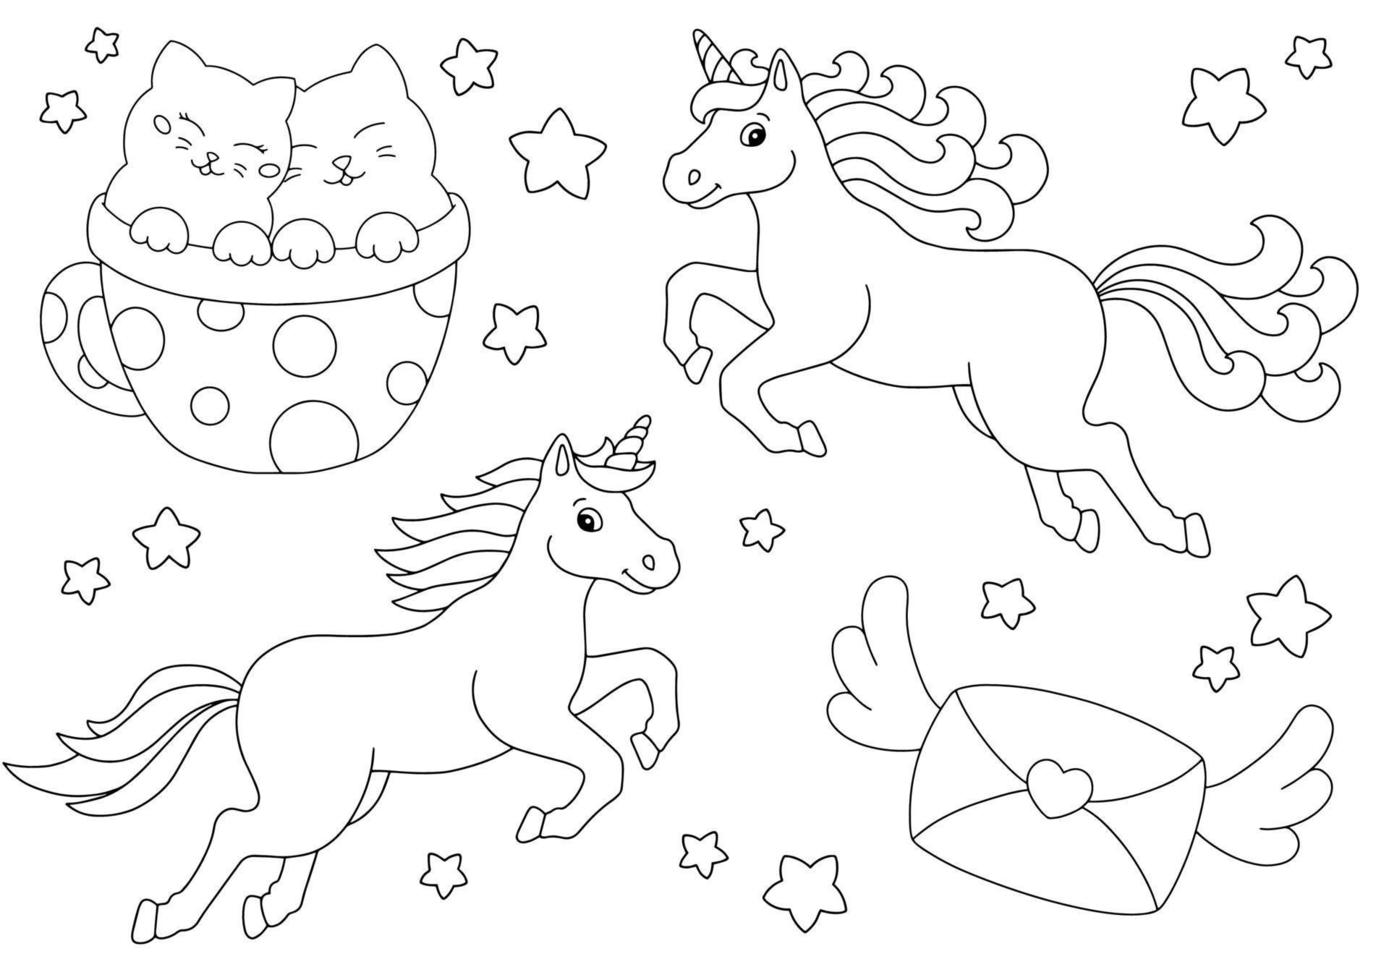 Unicorns, cats, envelope. Coloring book page for kids. Valentine's Day. Cartoon style character. Vector illustration isolated on white background.